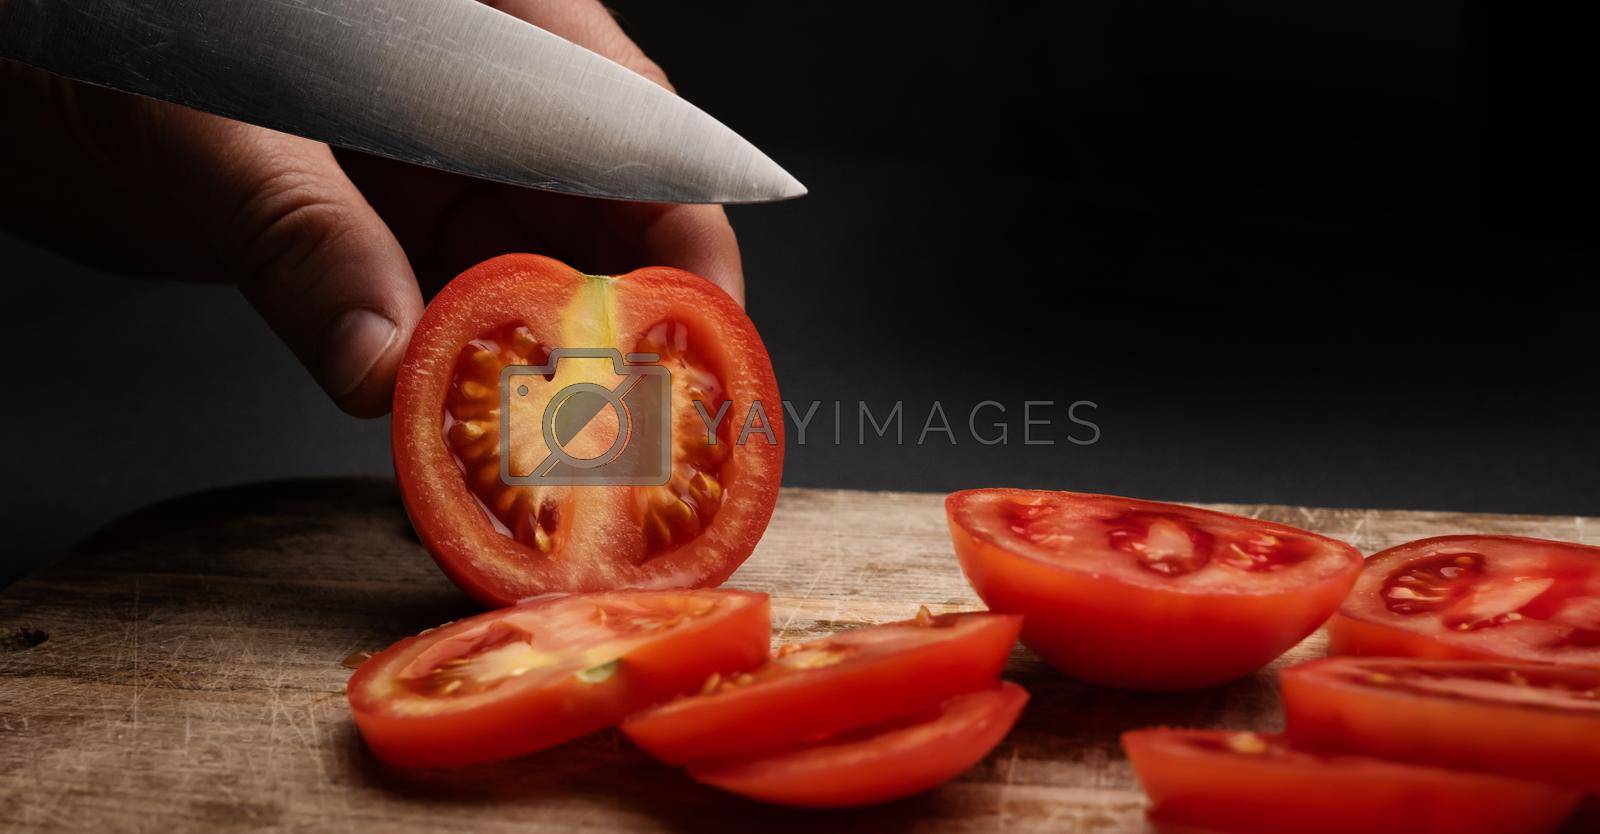 Royalty free image of Cherry tomatoes on wooden board by GekaSkr